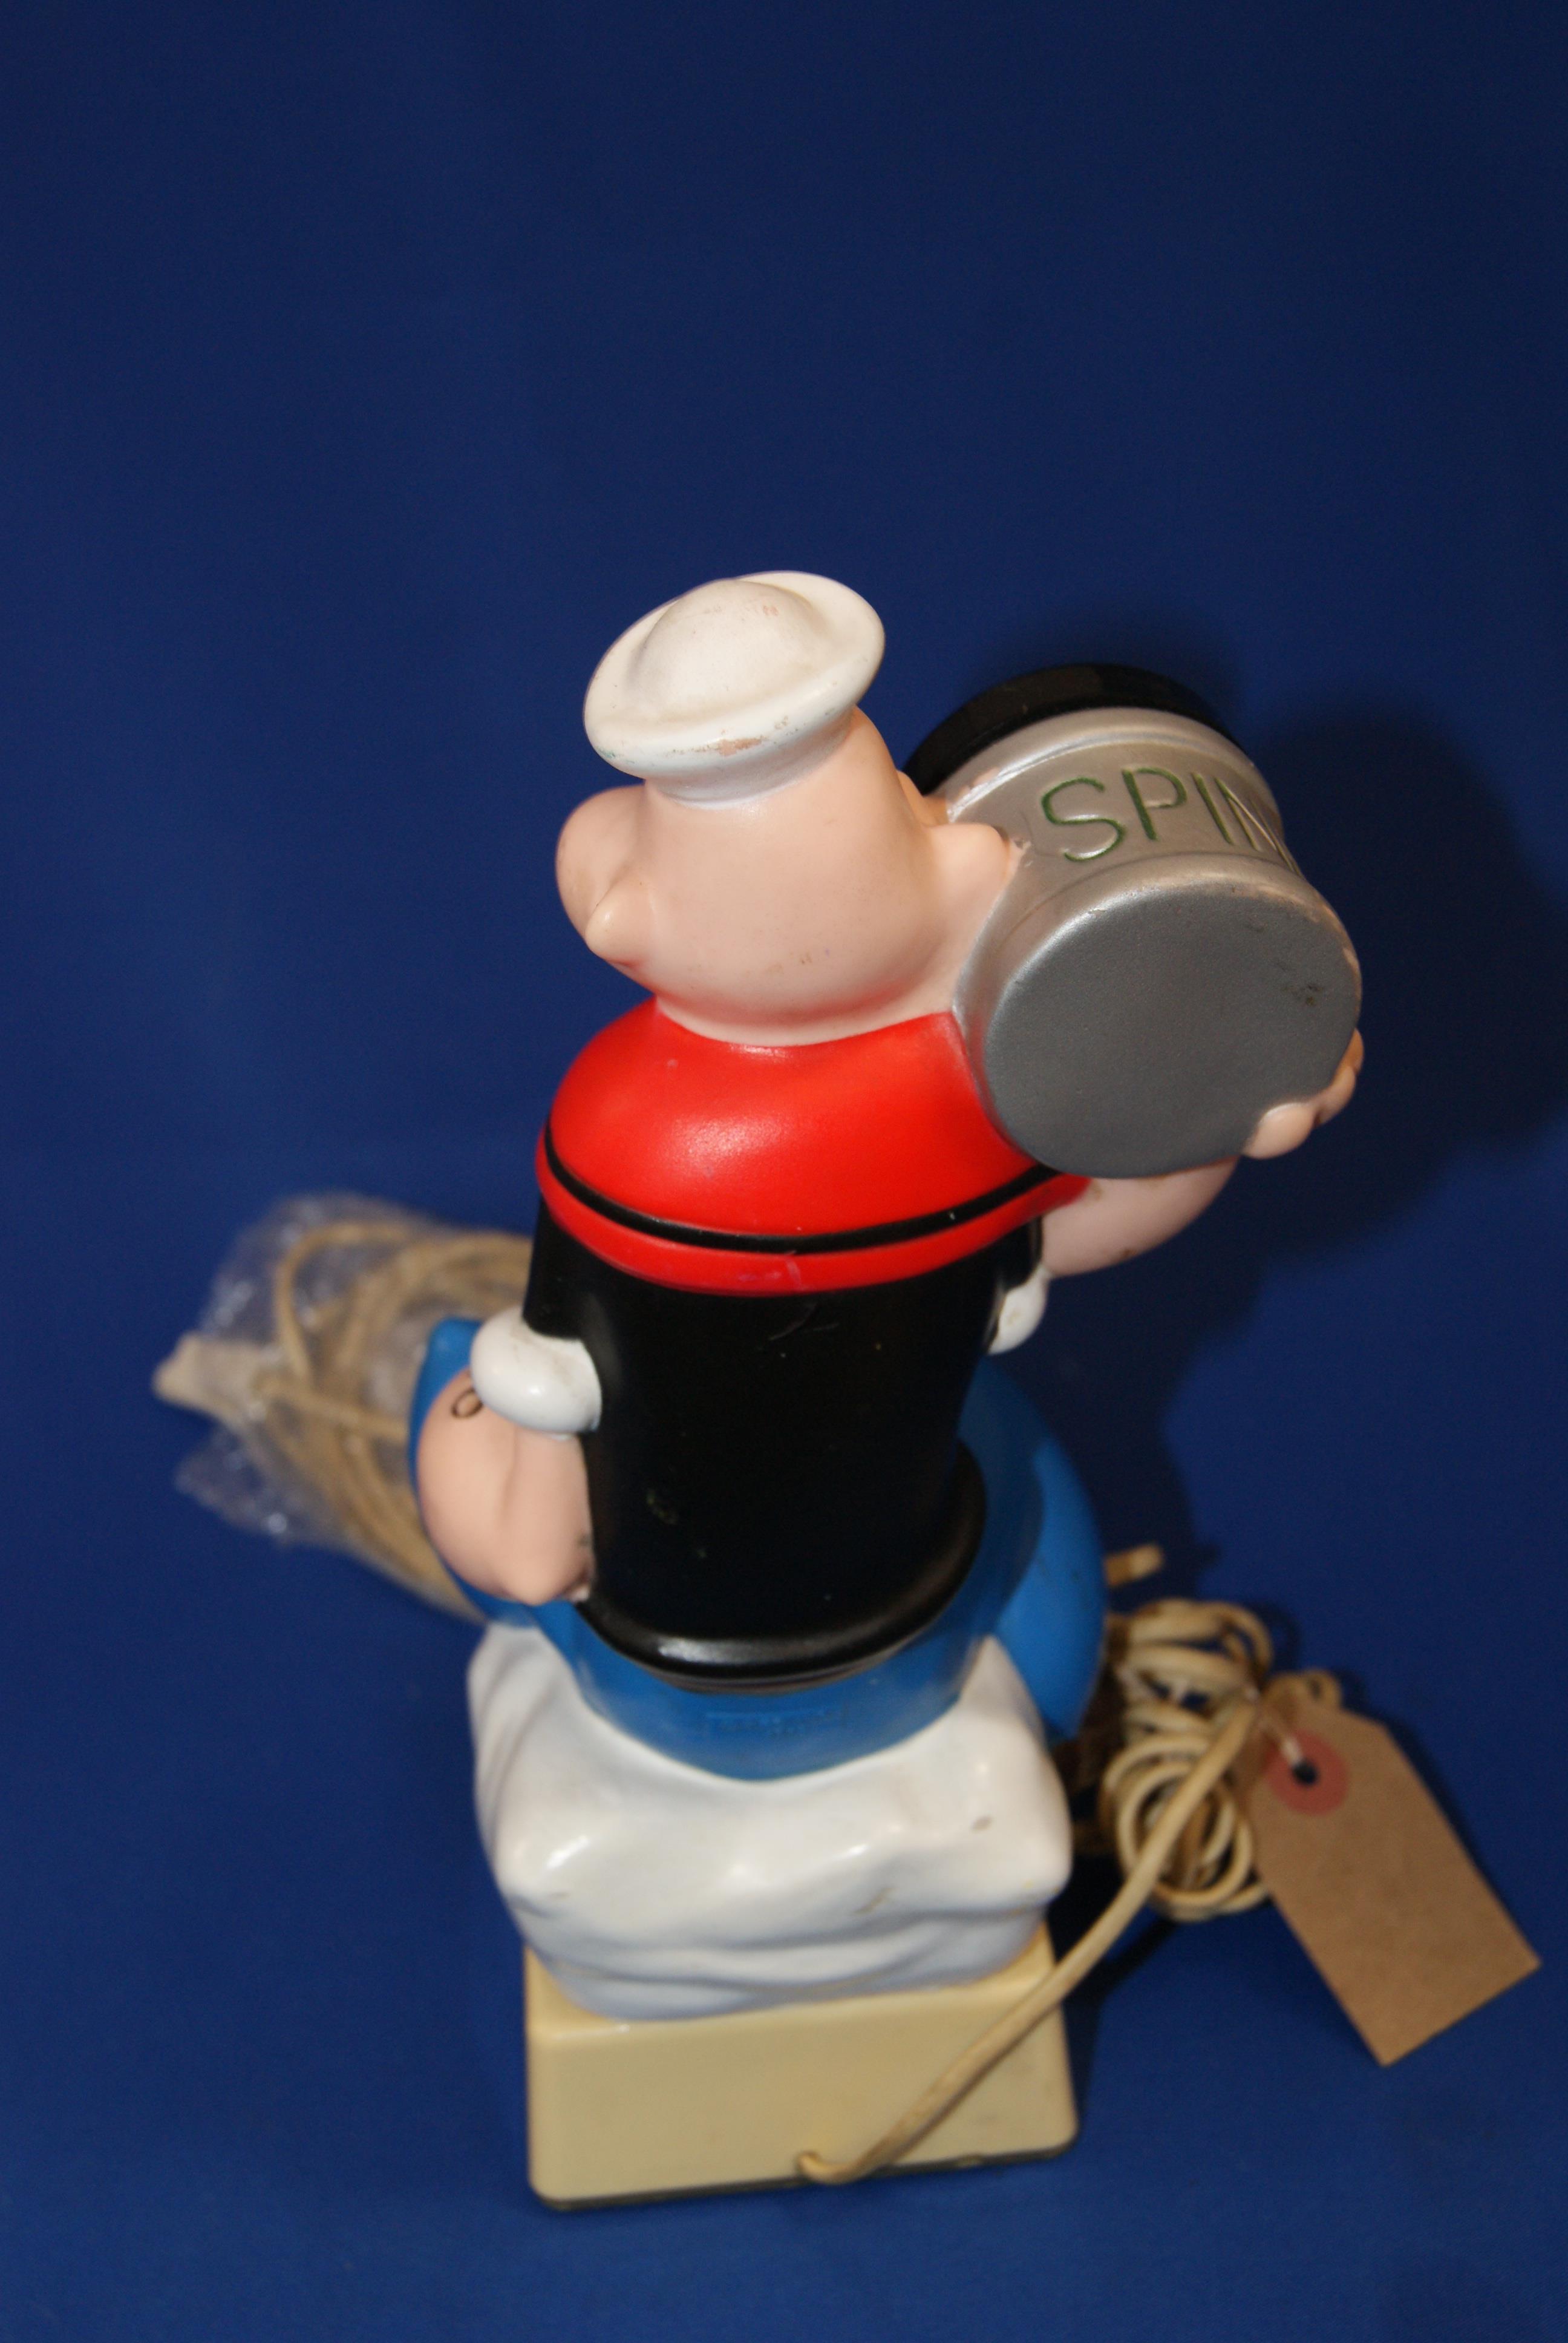 Very Rare Vintage KFS Inc. Popeye The Sailor Push Button Phone. Dated 1982. - Image 2 of 3